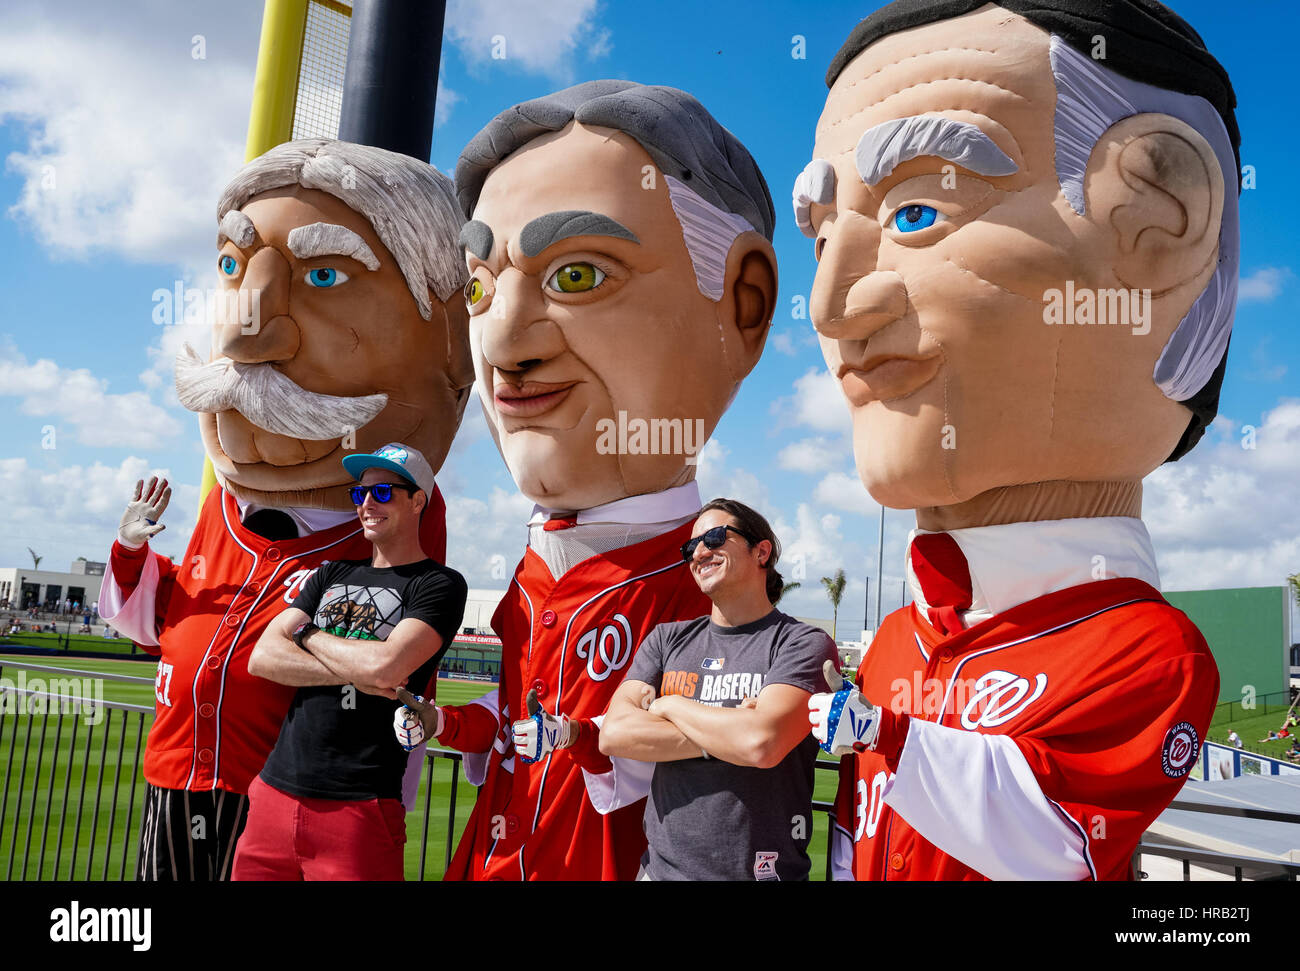 Florida, USA. 28th Feb, 2017. Fans pose with the racing President mascots during the opening Spring Training game for the Washington Nationals and Houston Astros at the Ballpark of the Palm Beaches in West Palm Beach on February 28, 2017. Credit: Richard Graulich/The Palm Beach Post/ZUMA Wire/Alamy Live News Stock Photo